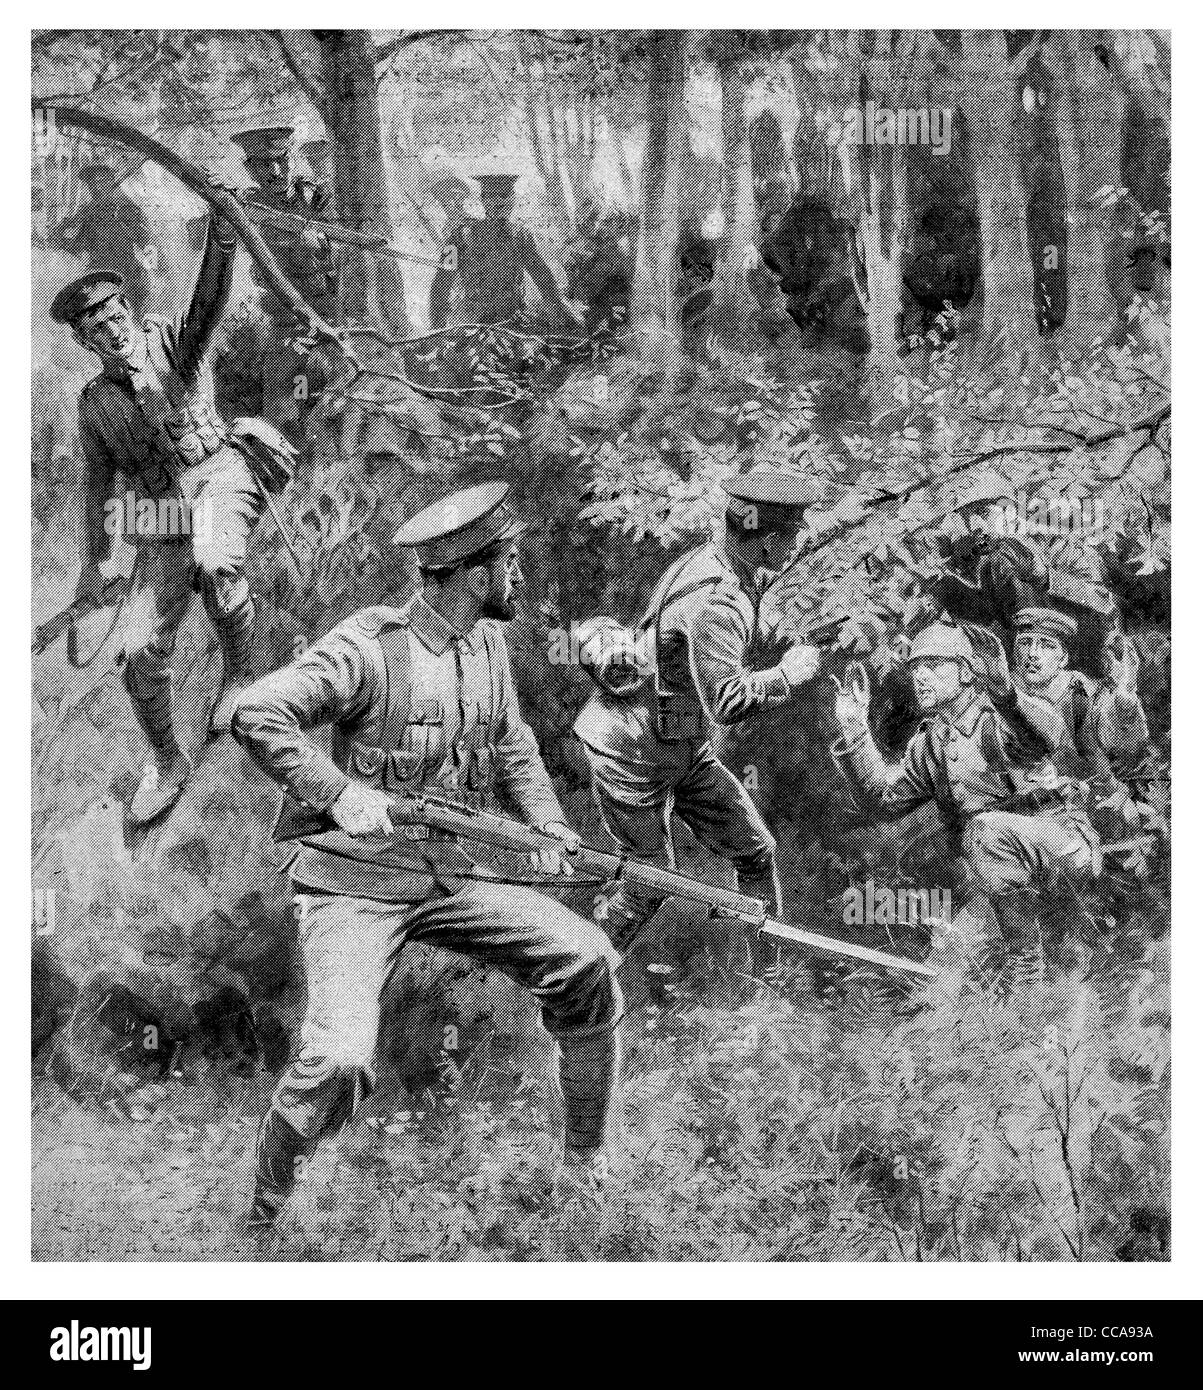 1914 Captured German soldiers surrender without a fight British troops mercy hands up give up white flag forest woods patrol Stock Photo